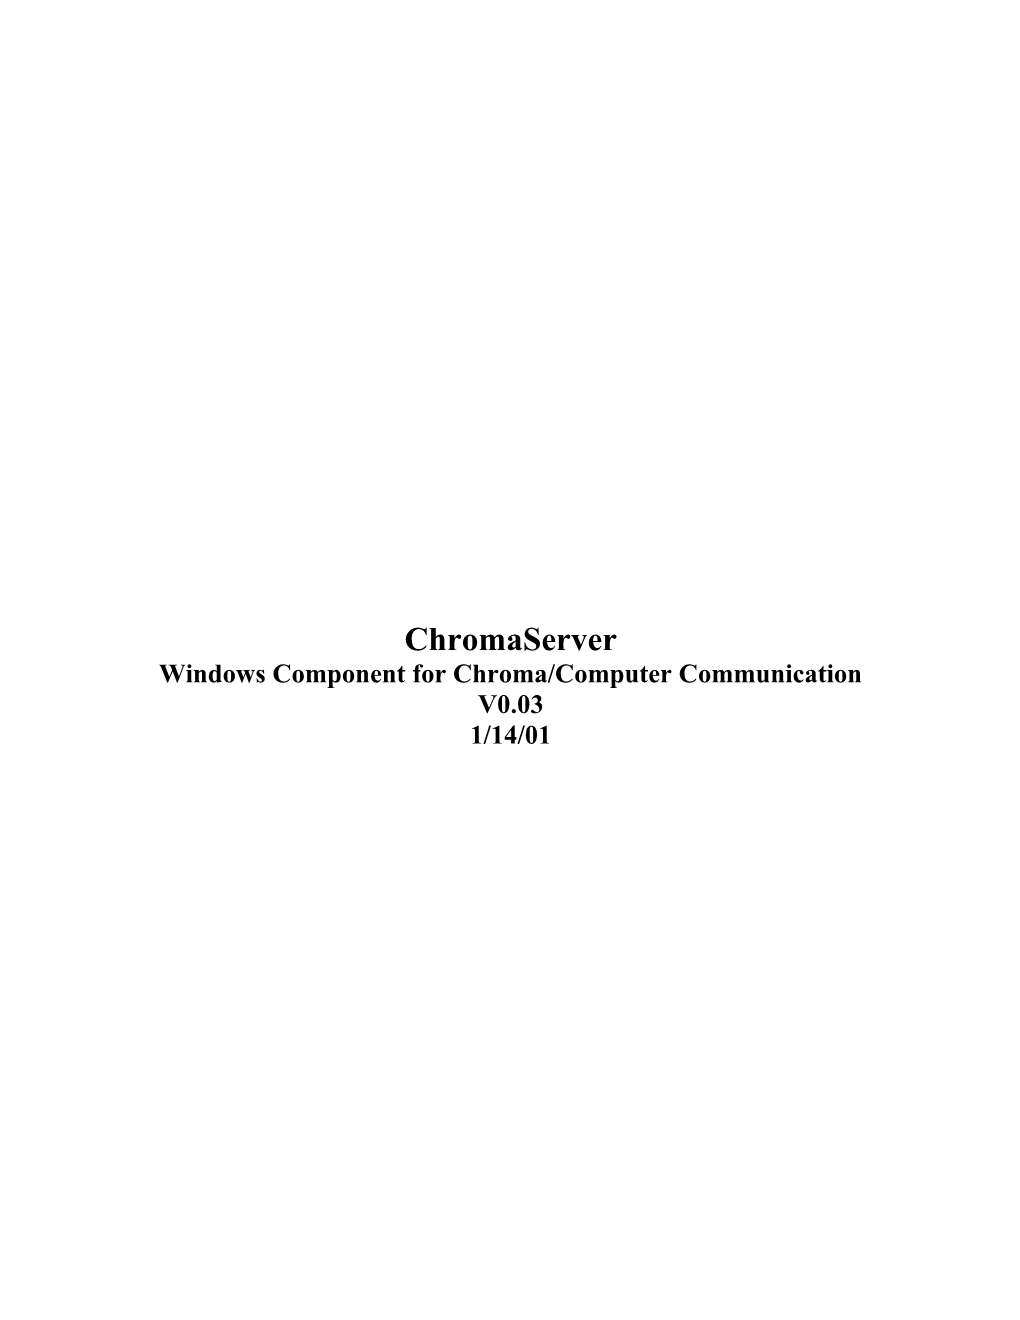 Windows Component for Chroma/Computer Communication